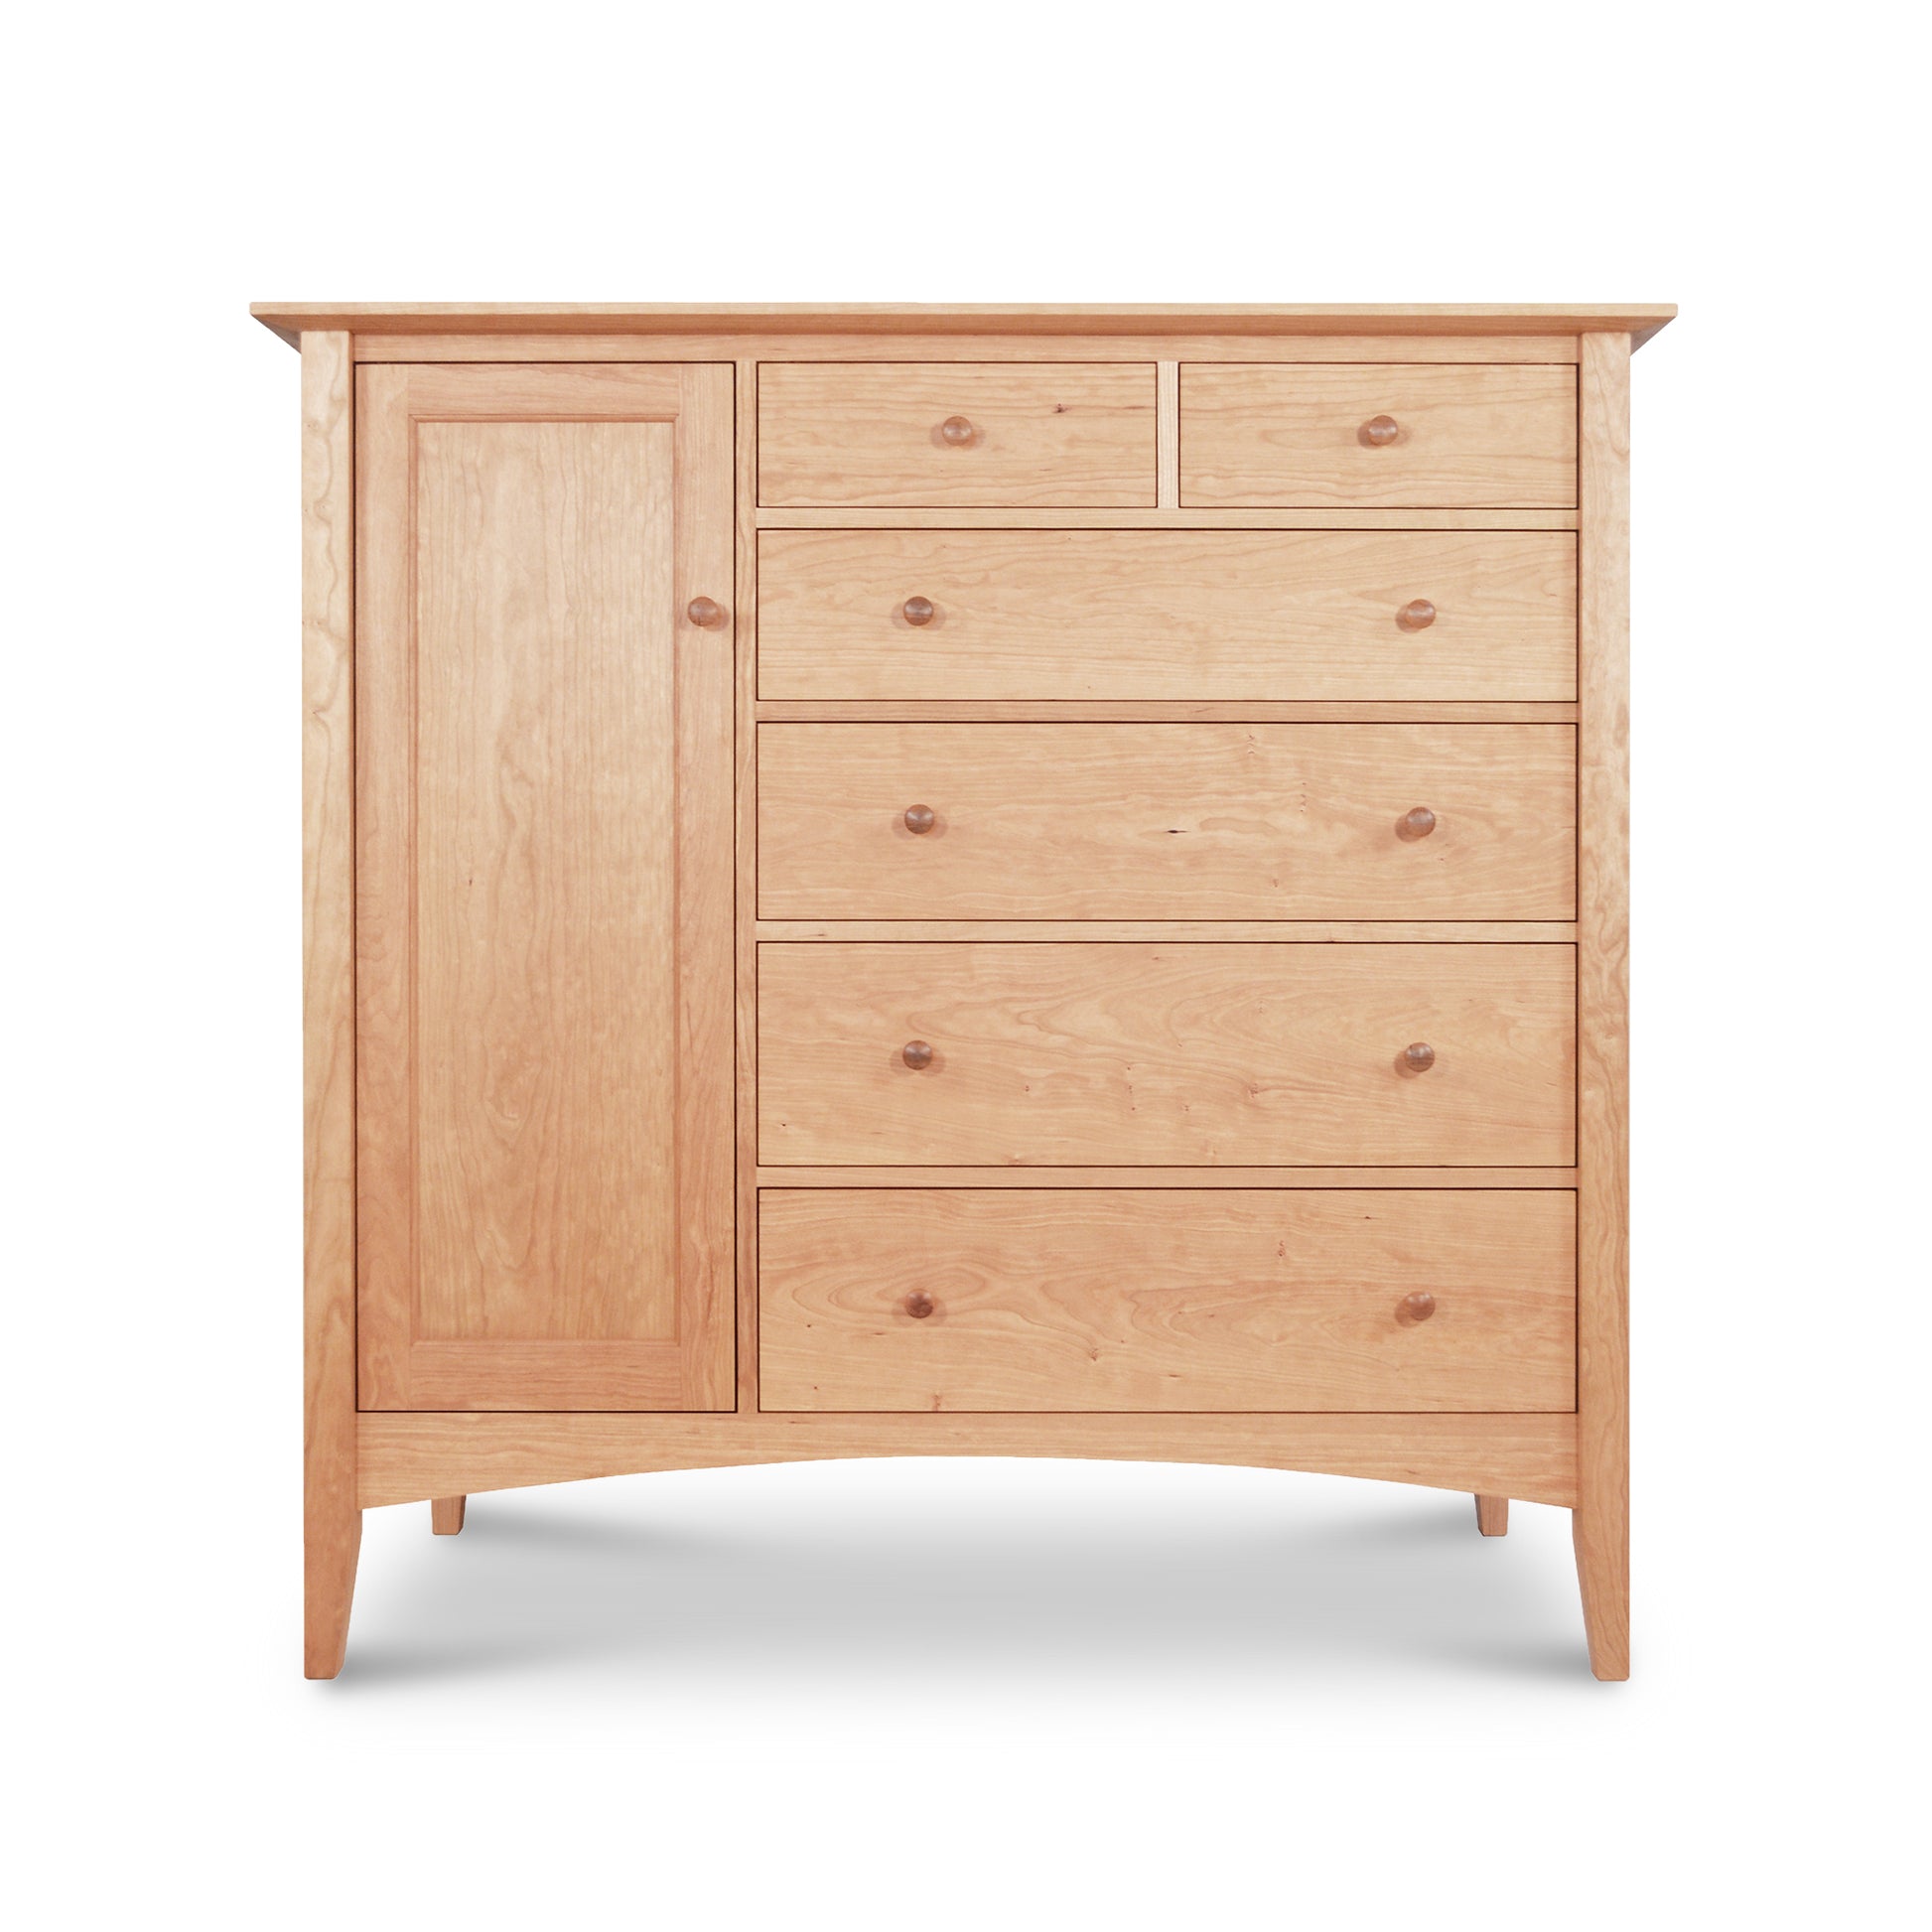 A Maple Corner Woodworks American Shaker Gent's Chest with a combination of drawers and a single cabinet door, on a white background.